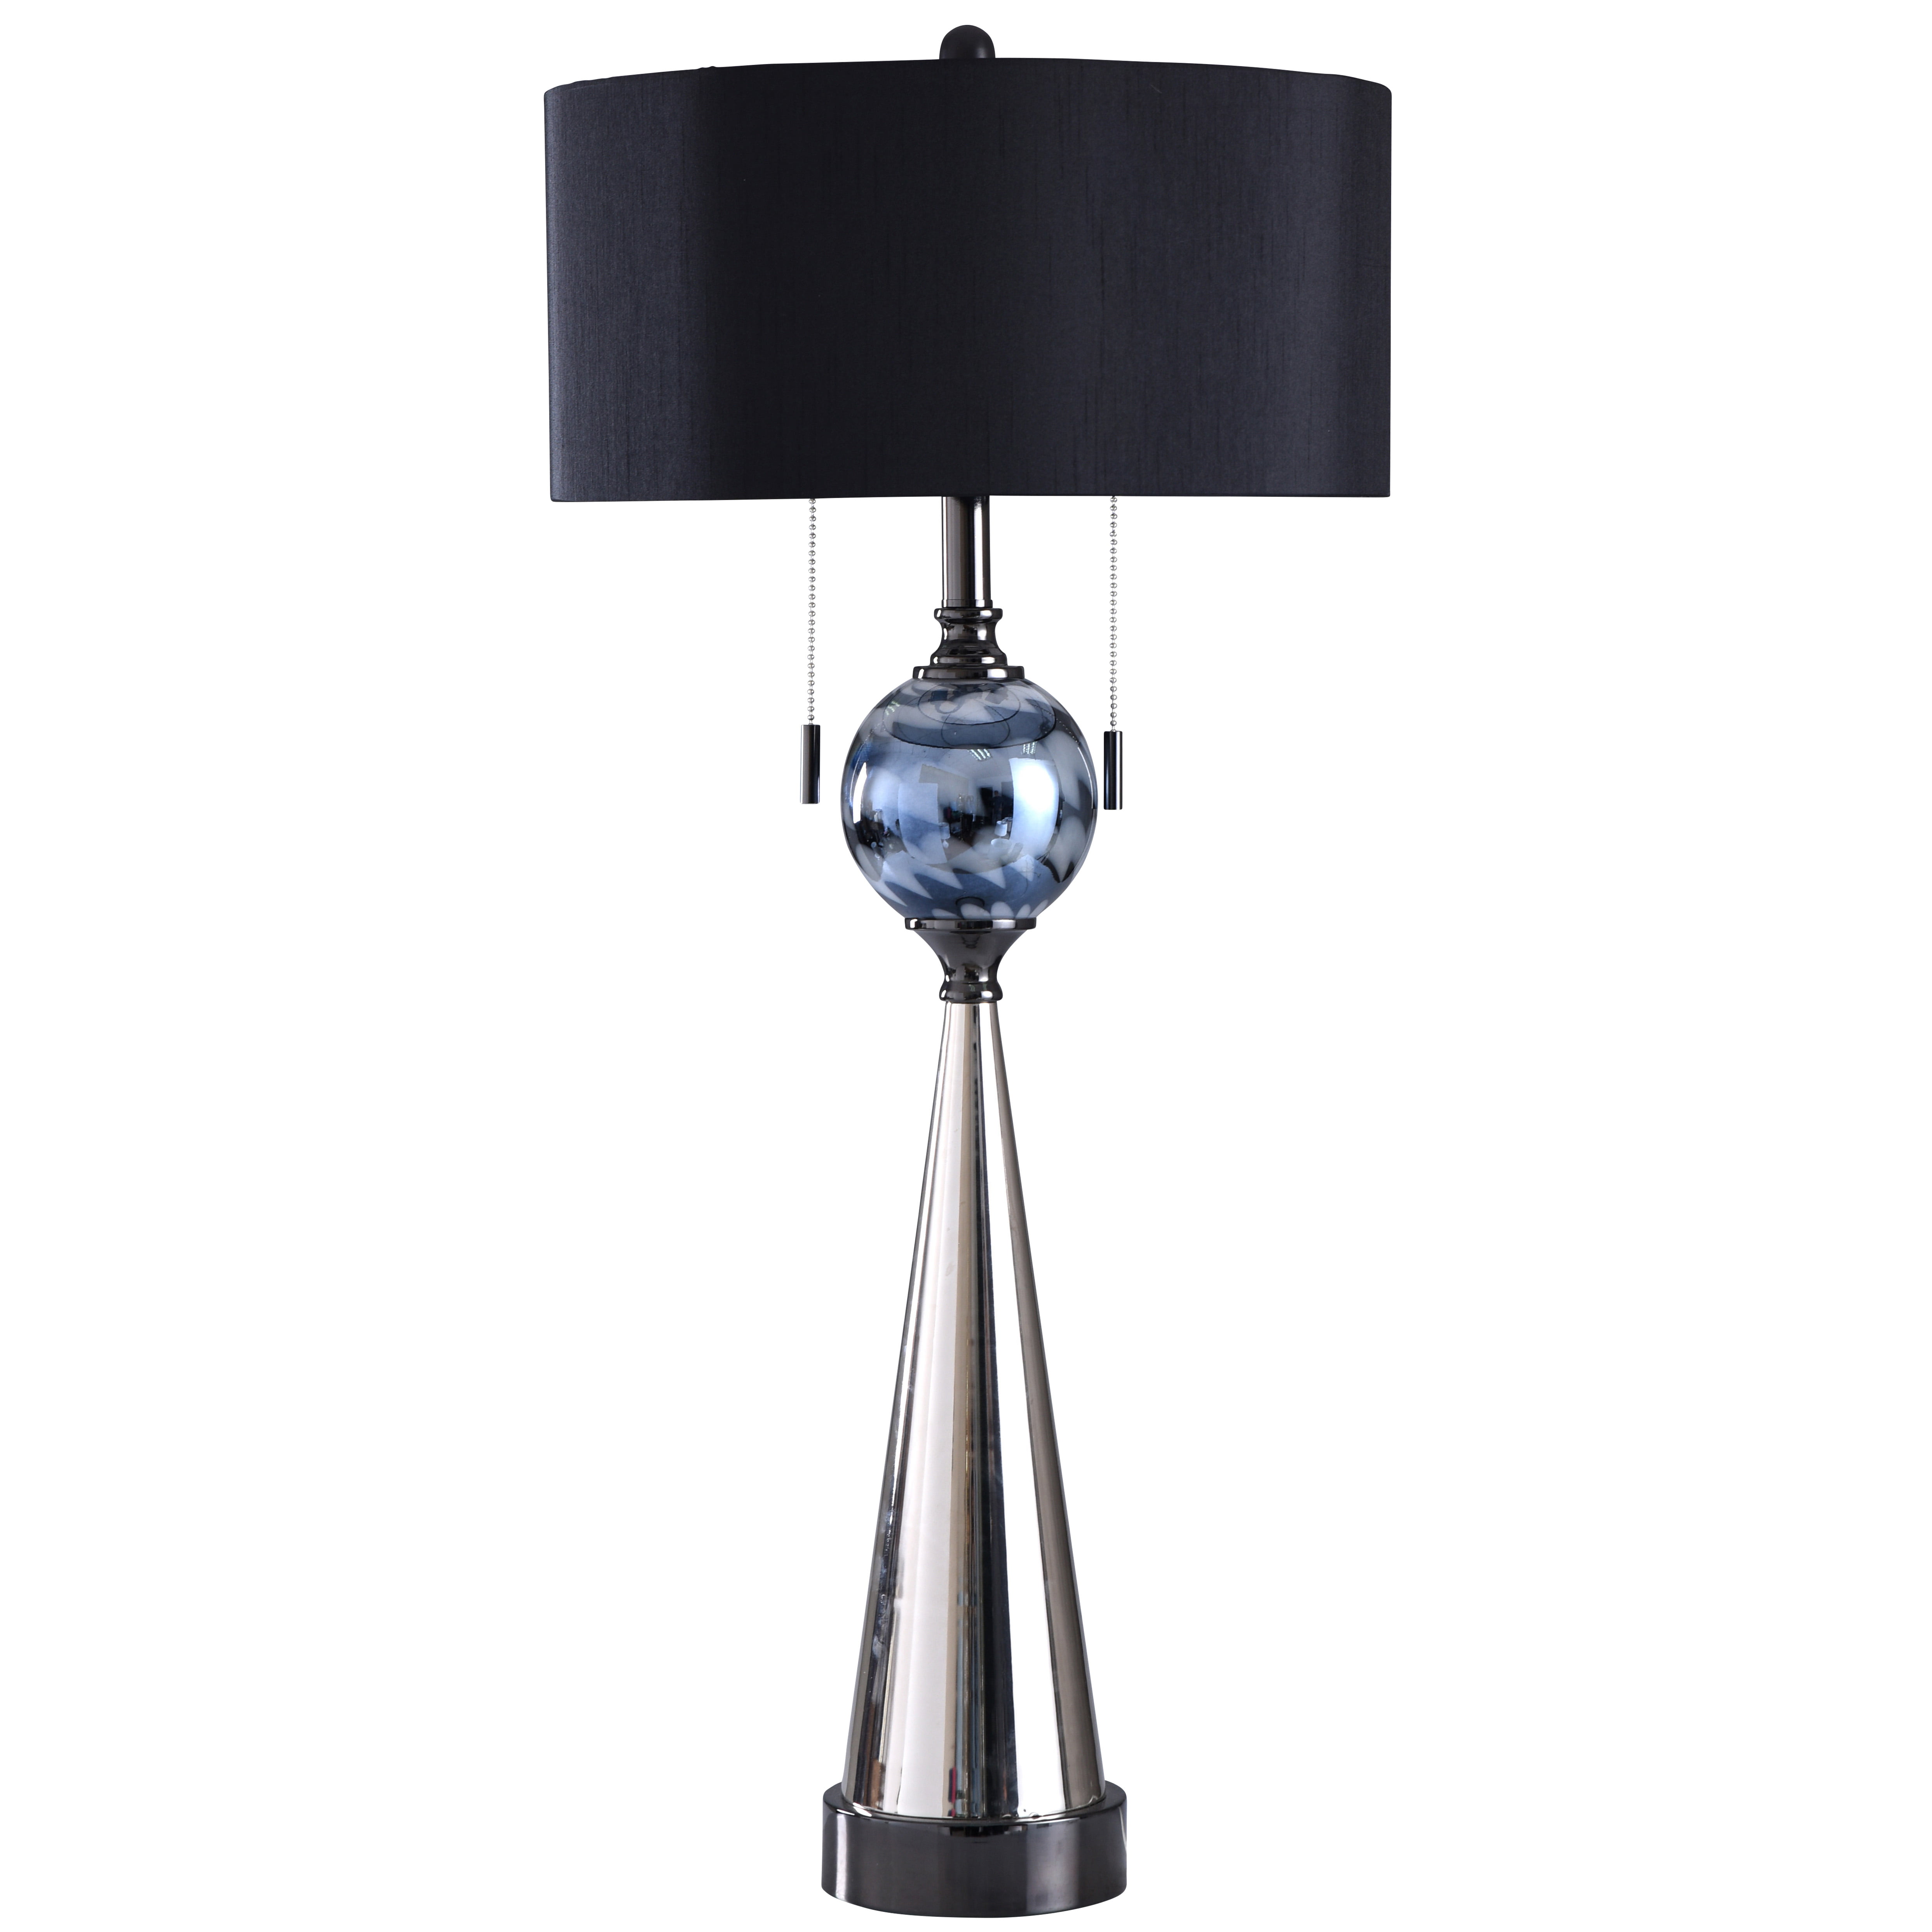 Adira Table Lamp Black Shade Silver, Modern Black And Silver Table Lamps